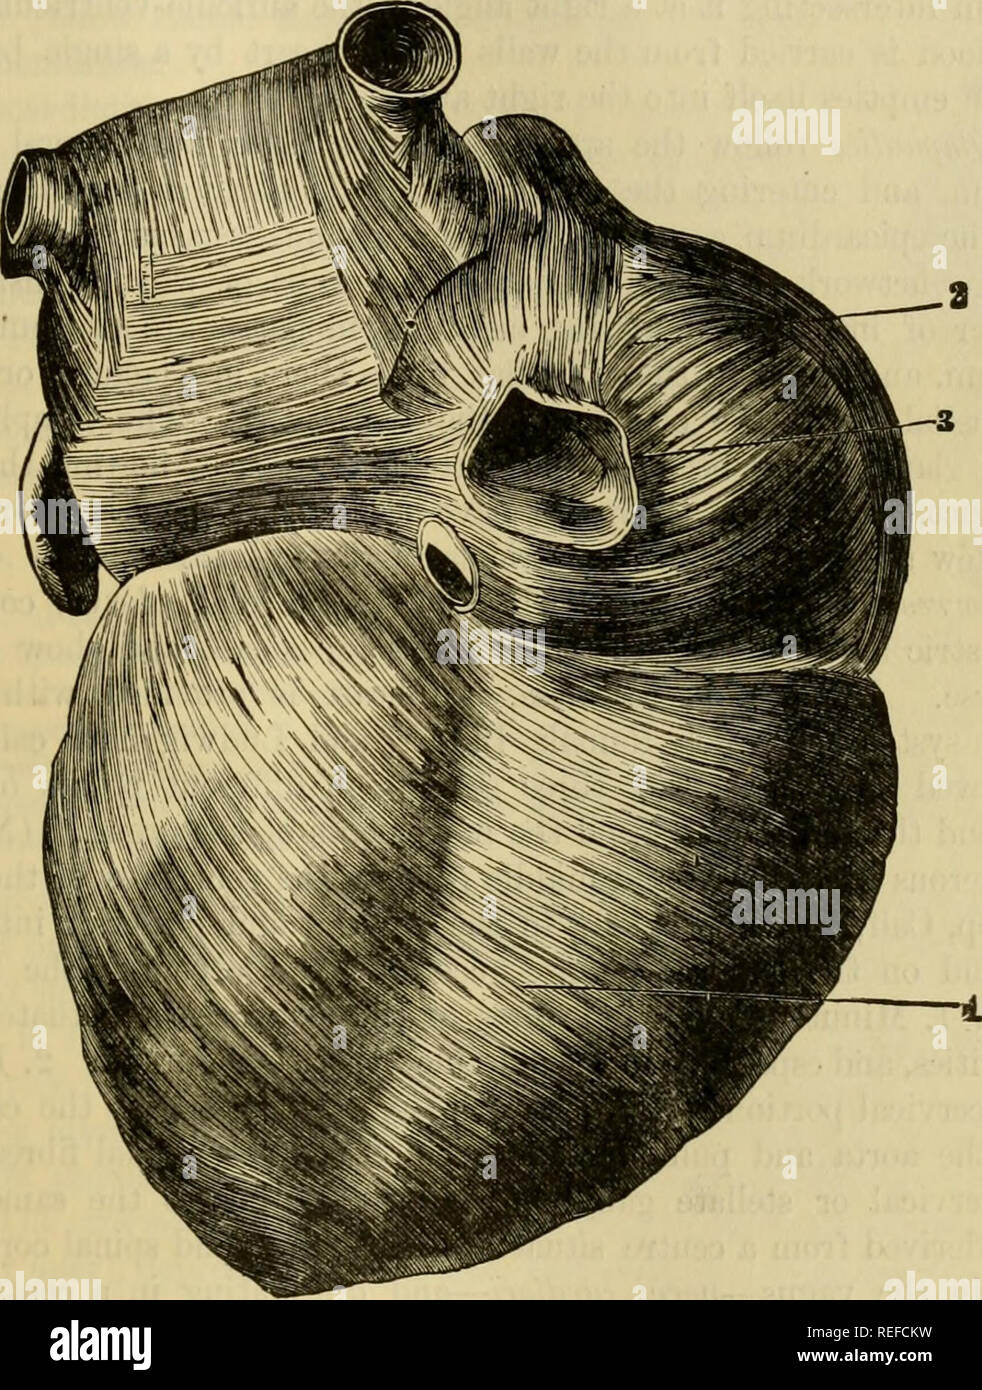 . The comparative anatomy of the domesticated animals. Veterinary anatomy. THE HEART. 595 The unitive fibres constitute two thin bands—a right and left, caiTied from one auricle to the other. The proper fibres are divided into several fasciculi, some of which are arranged in rings around the auriculo-ventricular opening ; others in interwoven loops; and others, again, in sphincters, which suiTound the entrance of the veins. These fibres are arranged in such a manner that, in contracting, they diminish the auricles by their superior and lateral planes and extremities, and propel the blood towar Stock Photo